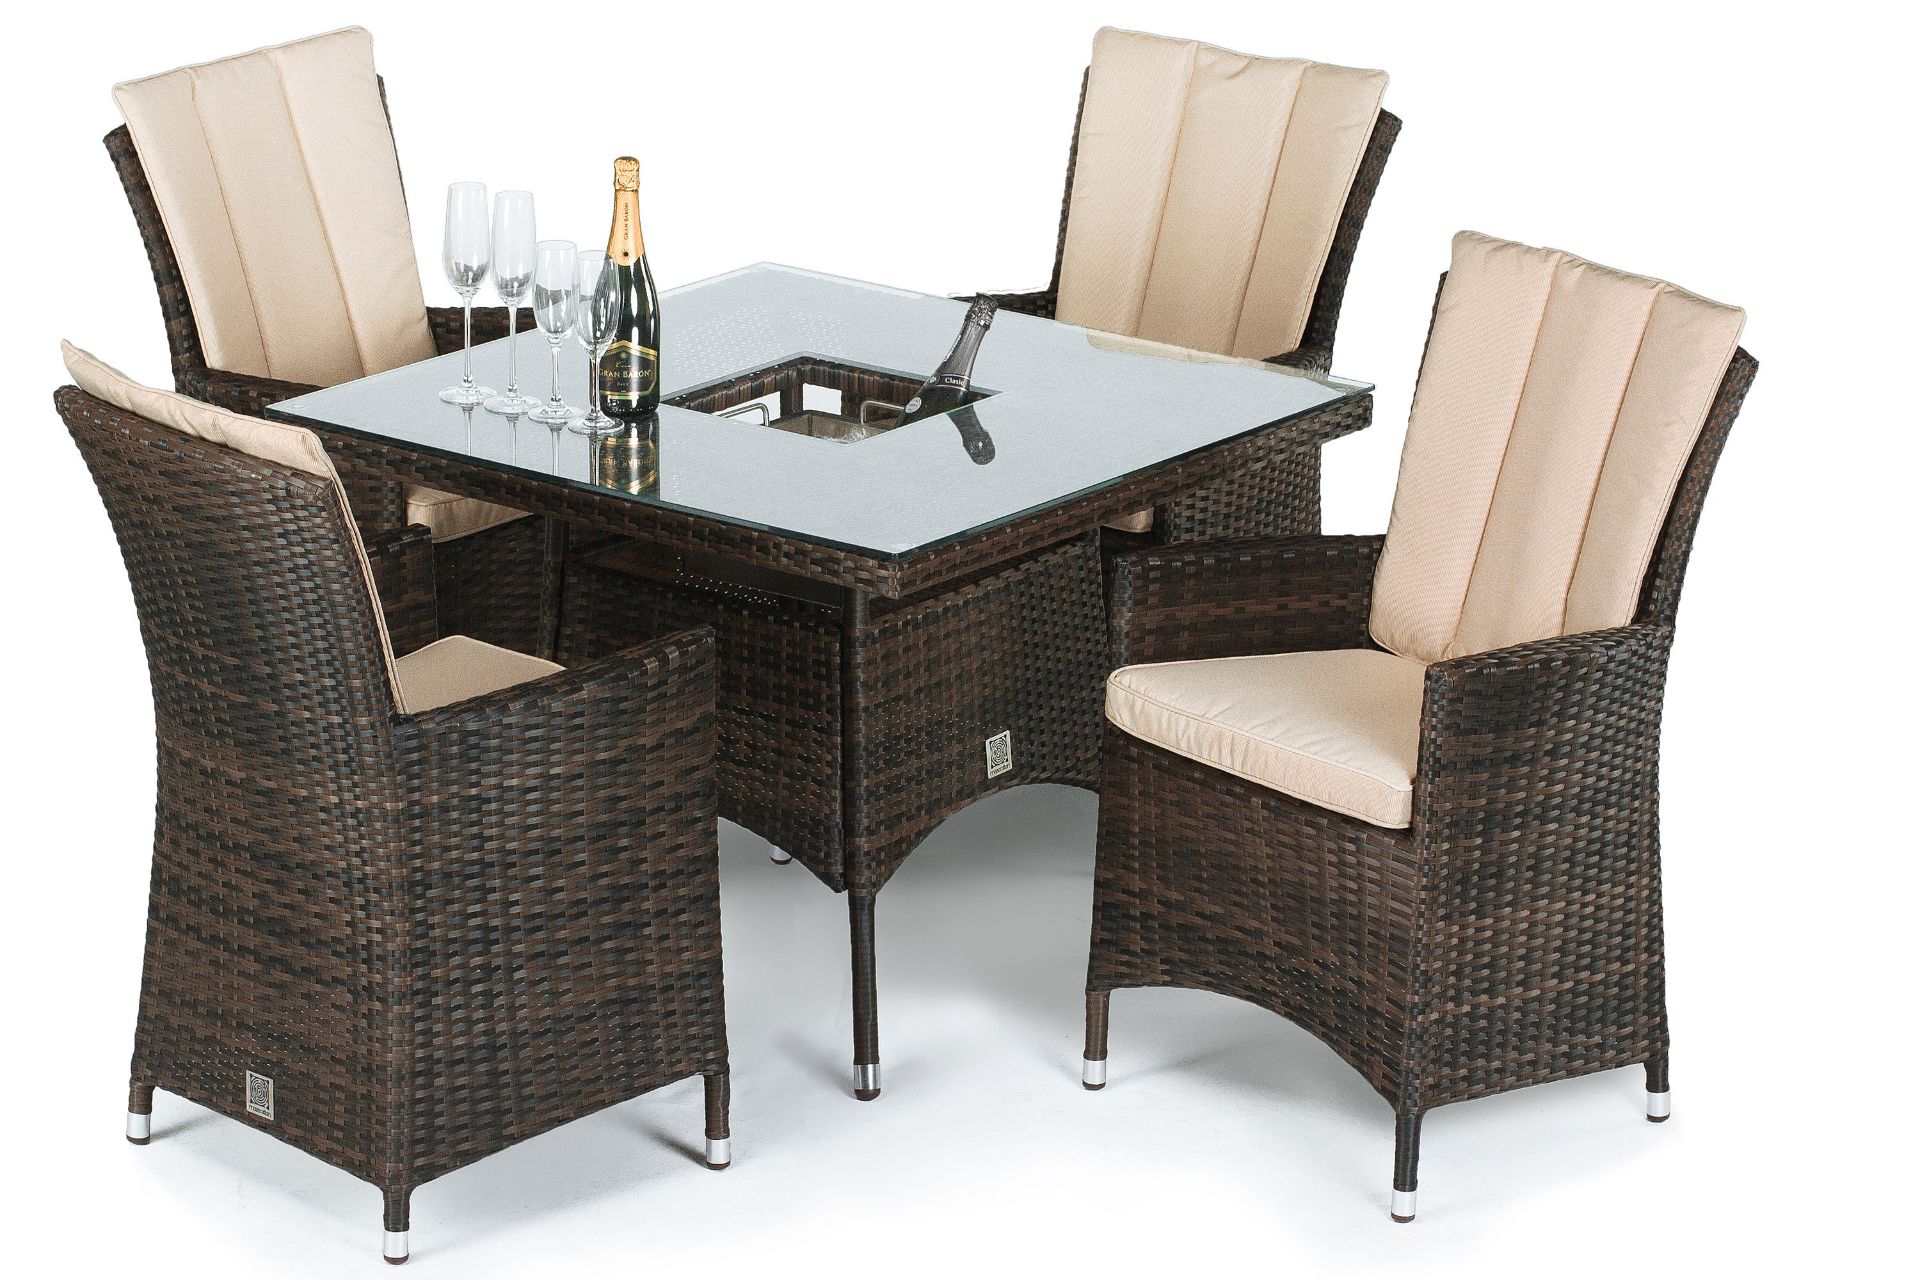 Rattan LA 4 Seat Dining Set With Ice Bucket (Brown) *BRAND NEW* - Image 2 of 2